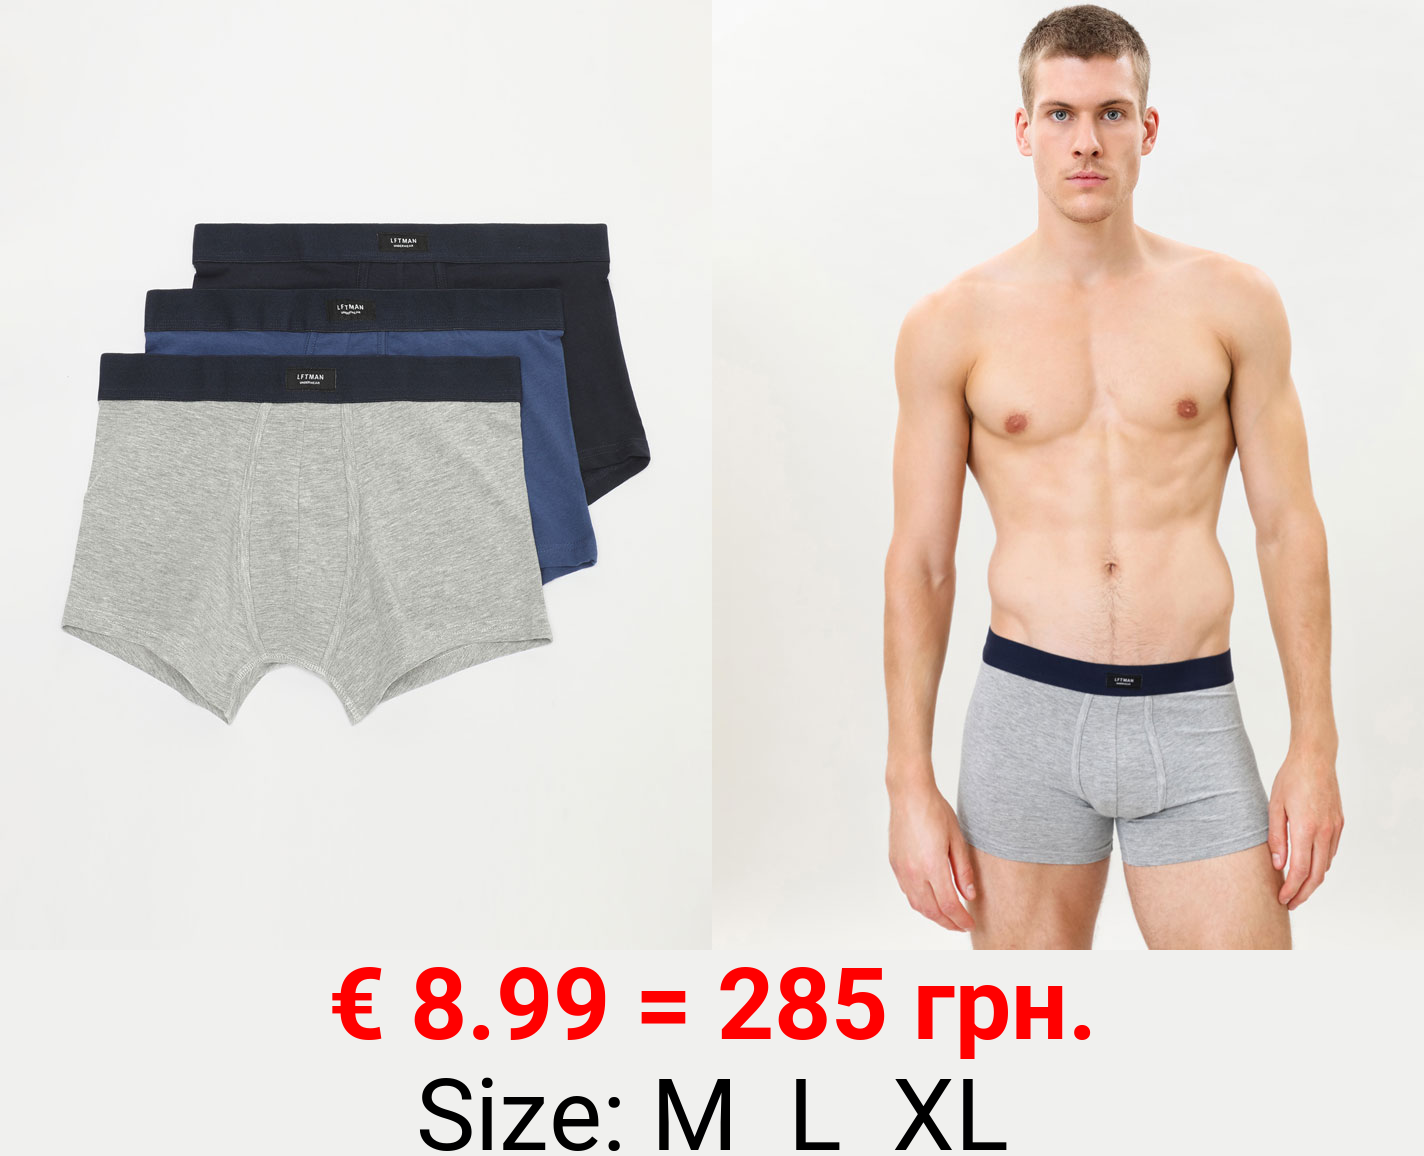 3-Pack of Basic Boxers